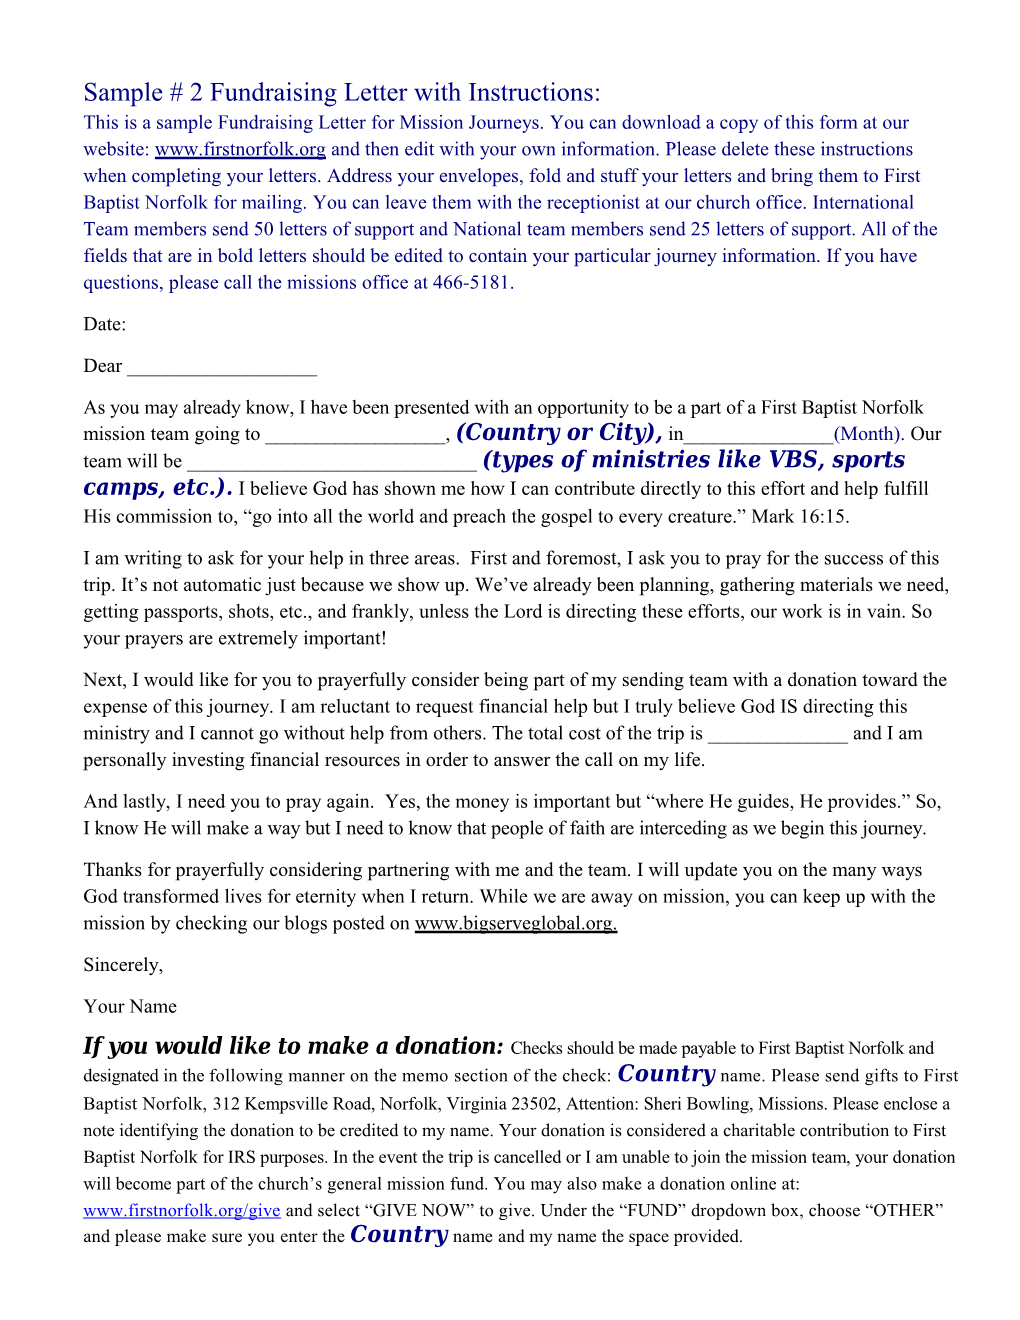 Sample # 2 Fundraising Letter with Instructions: This Is a Sample Fundraising Letter For